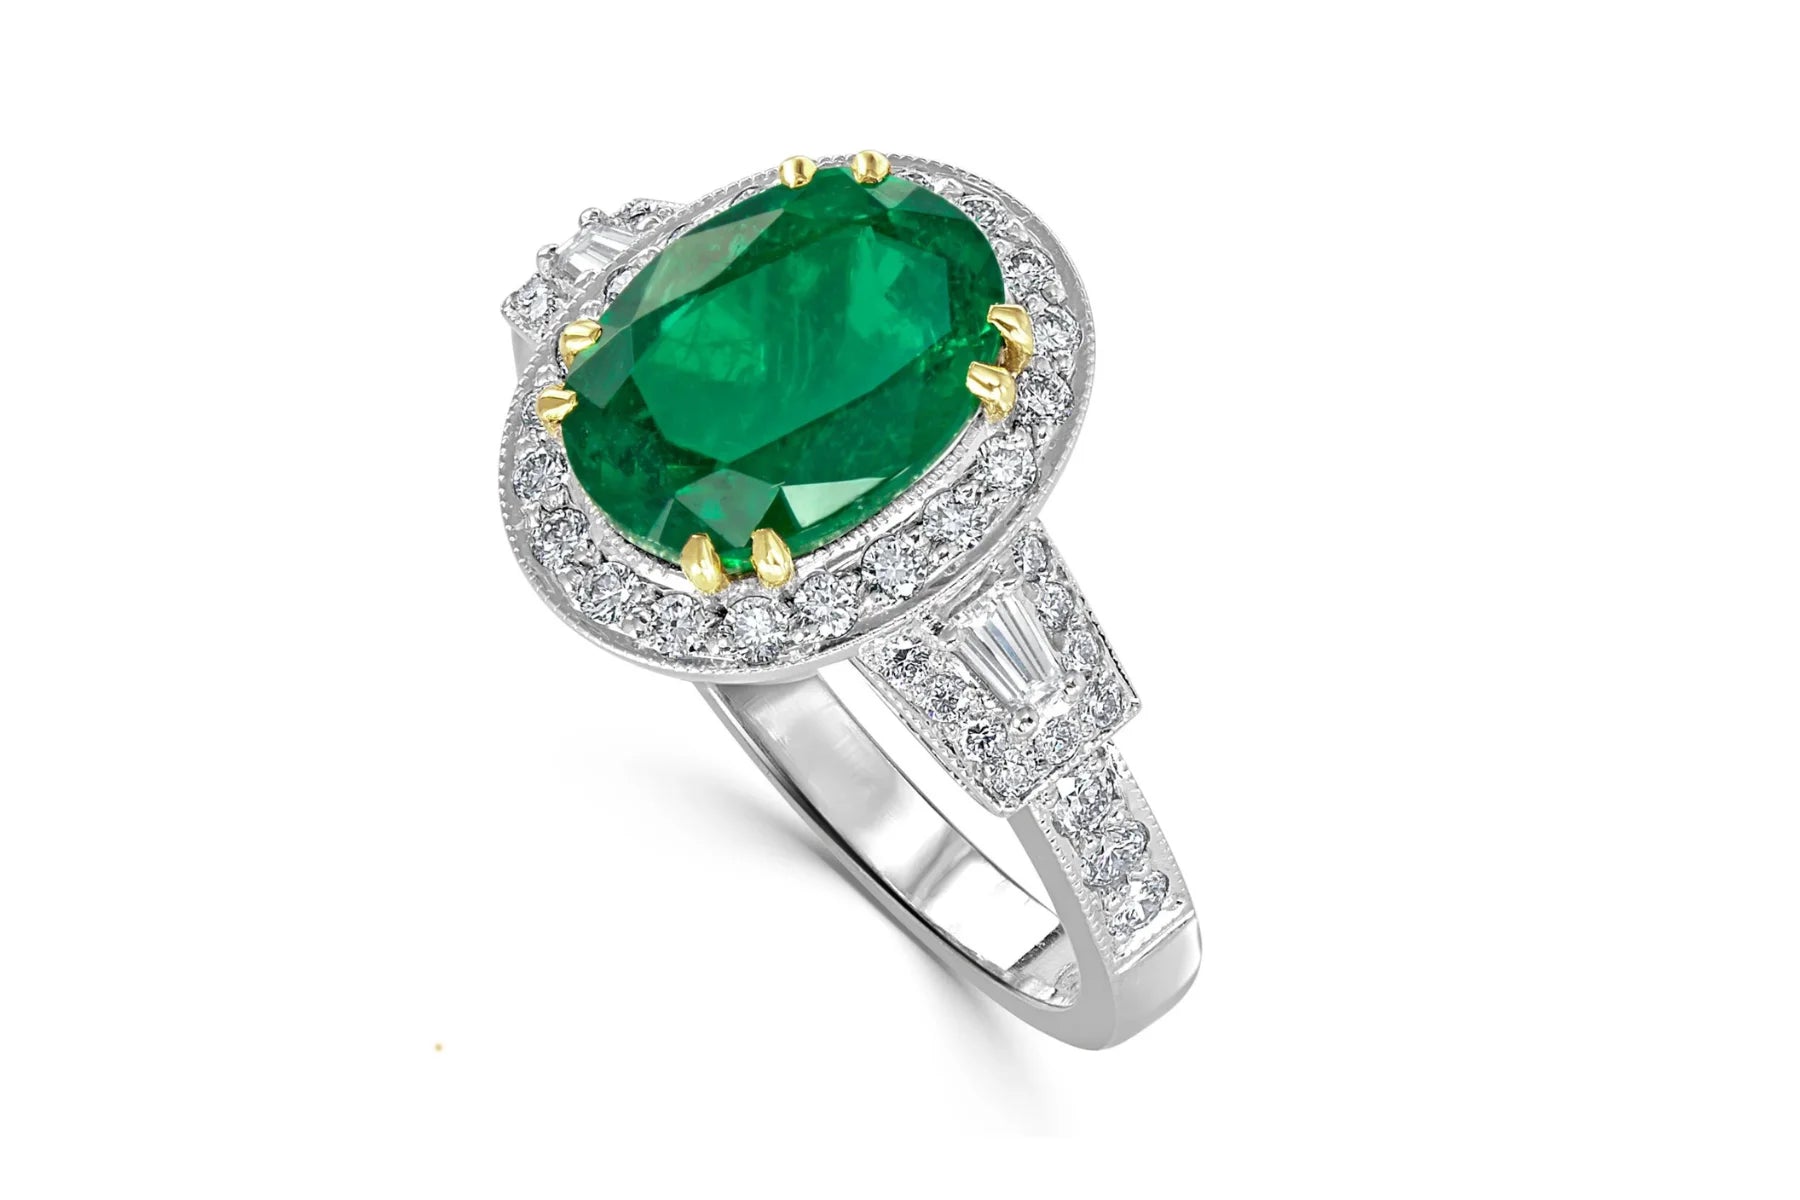 Emerald Engagement Rings & Jewellery